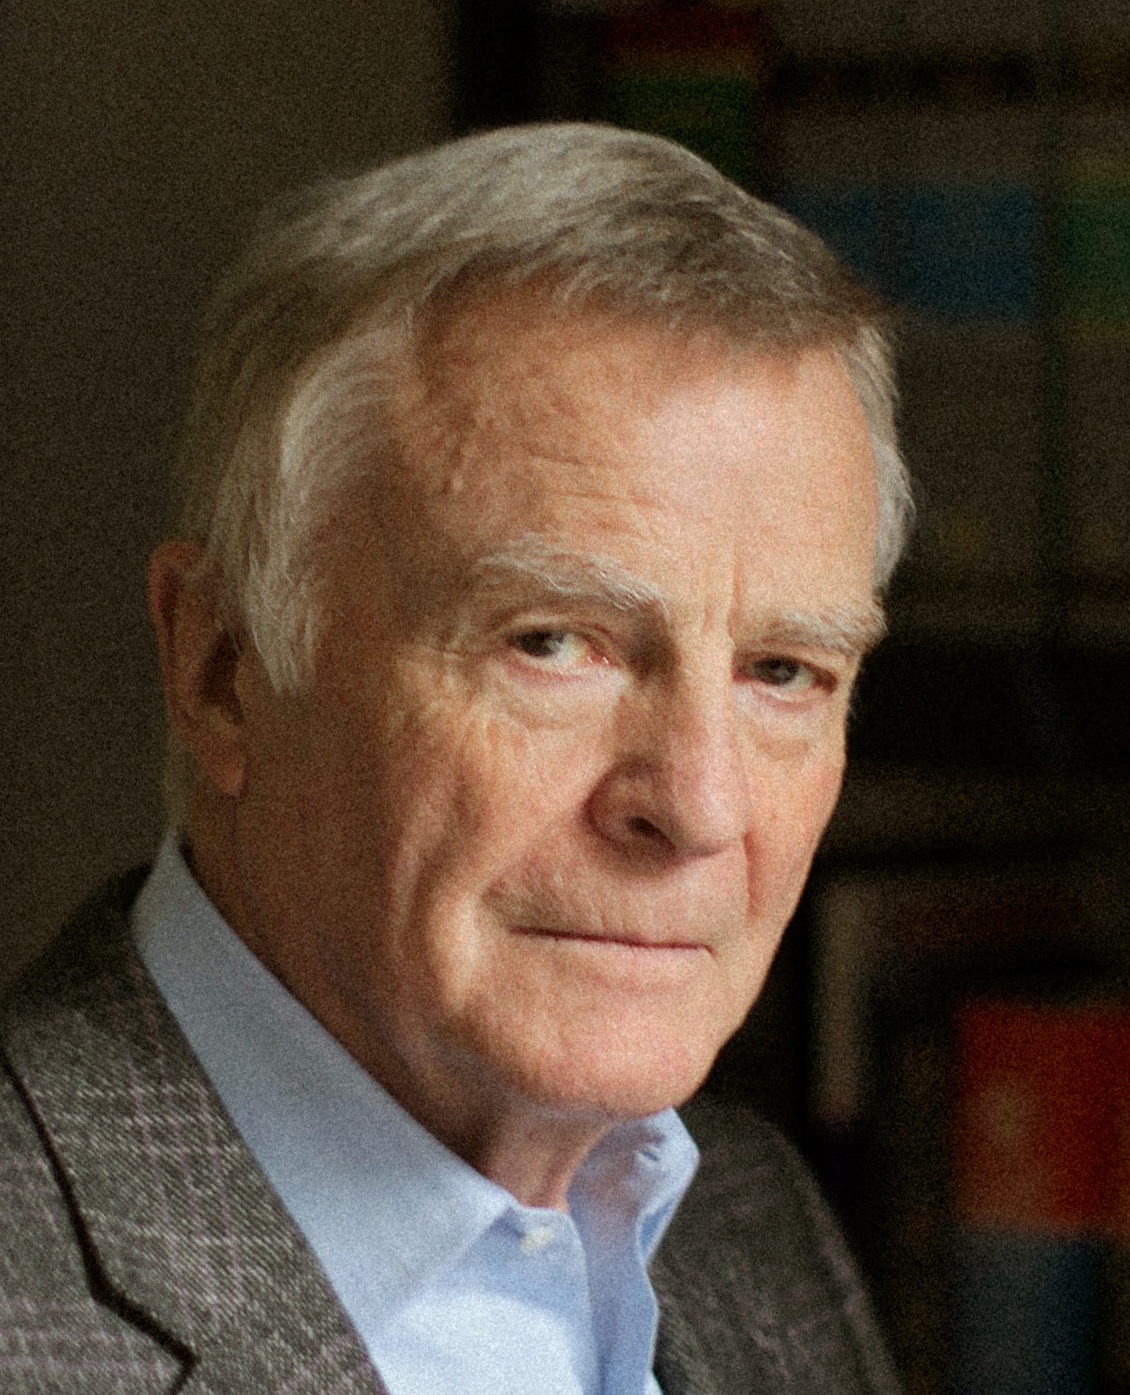 Max Mosley photographed at home in London. Photo Rick Pushinsky.